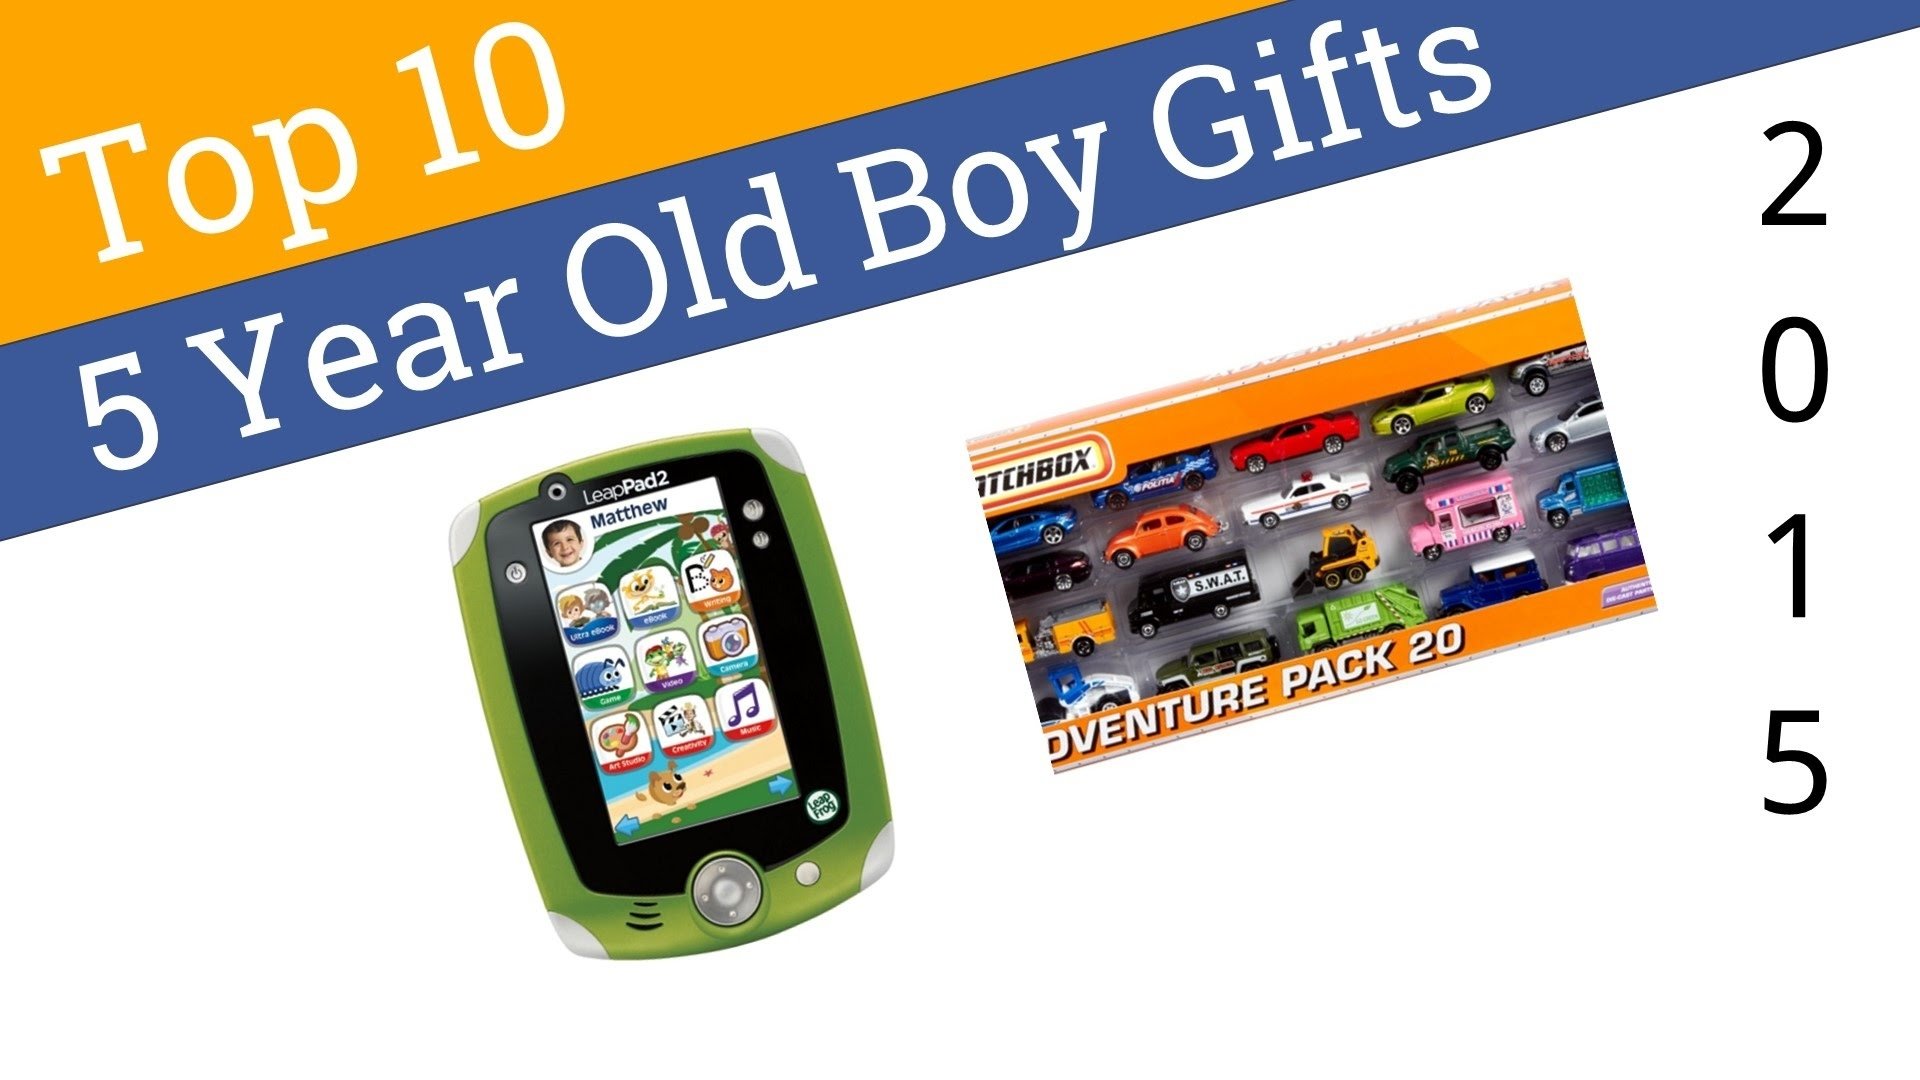 10 Awesome Birthday Ideas For A 5 Year Old Boy 10 best 5 year old boy gifts 2015 youtube 2 2022